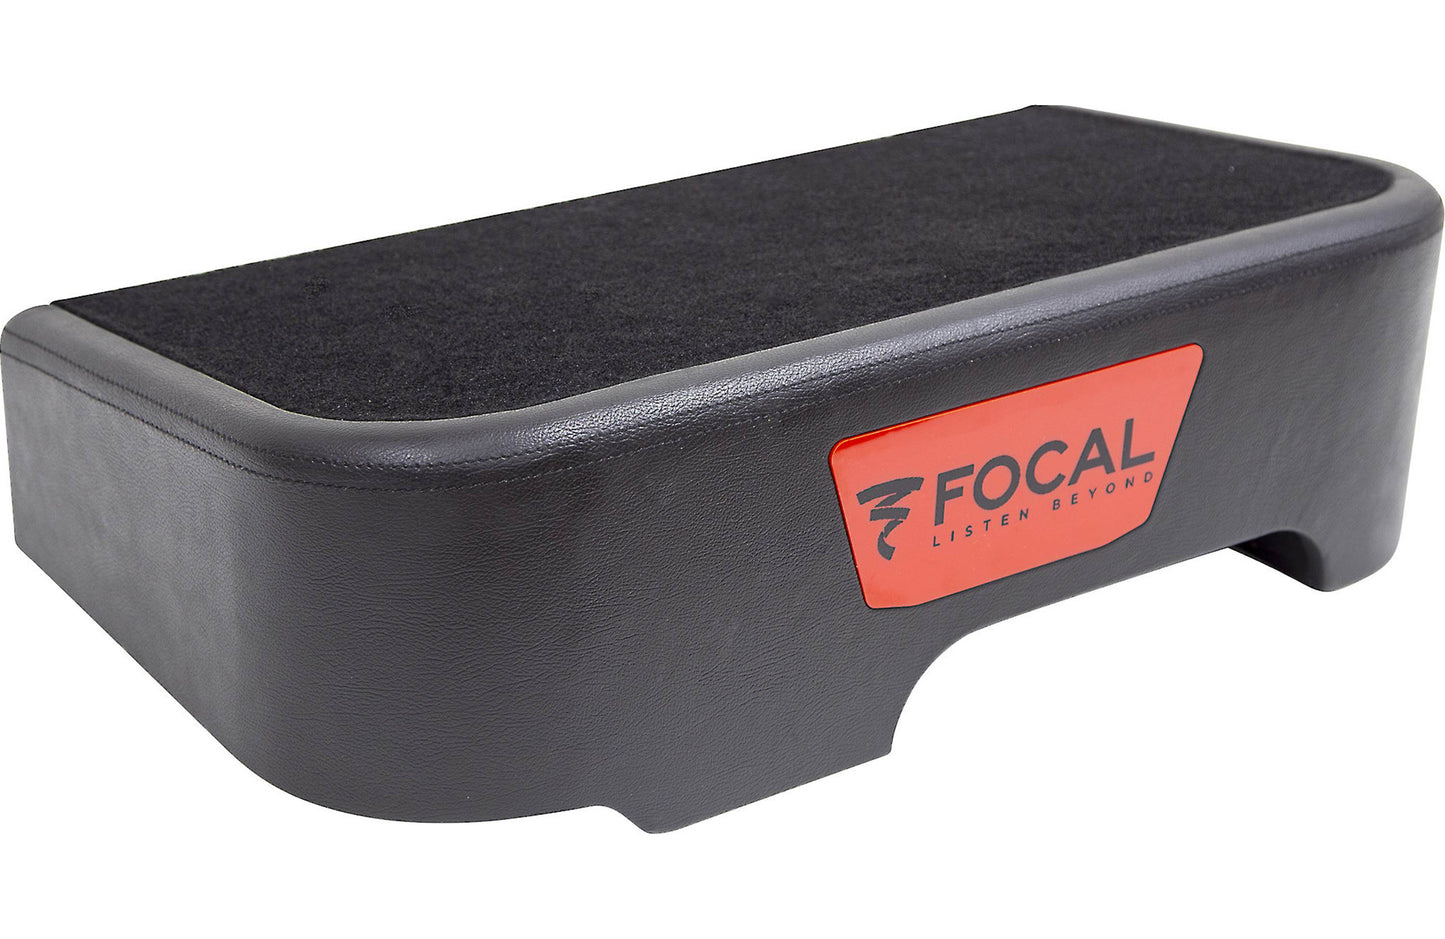 Focal Flax Chevy Single 10 Expert Series subwoofer enclosure with P25FS 10" subwoofer — fits select 2007-up Chevrolet and GMC Crew Cab trucks